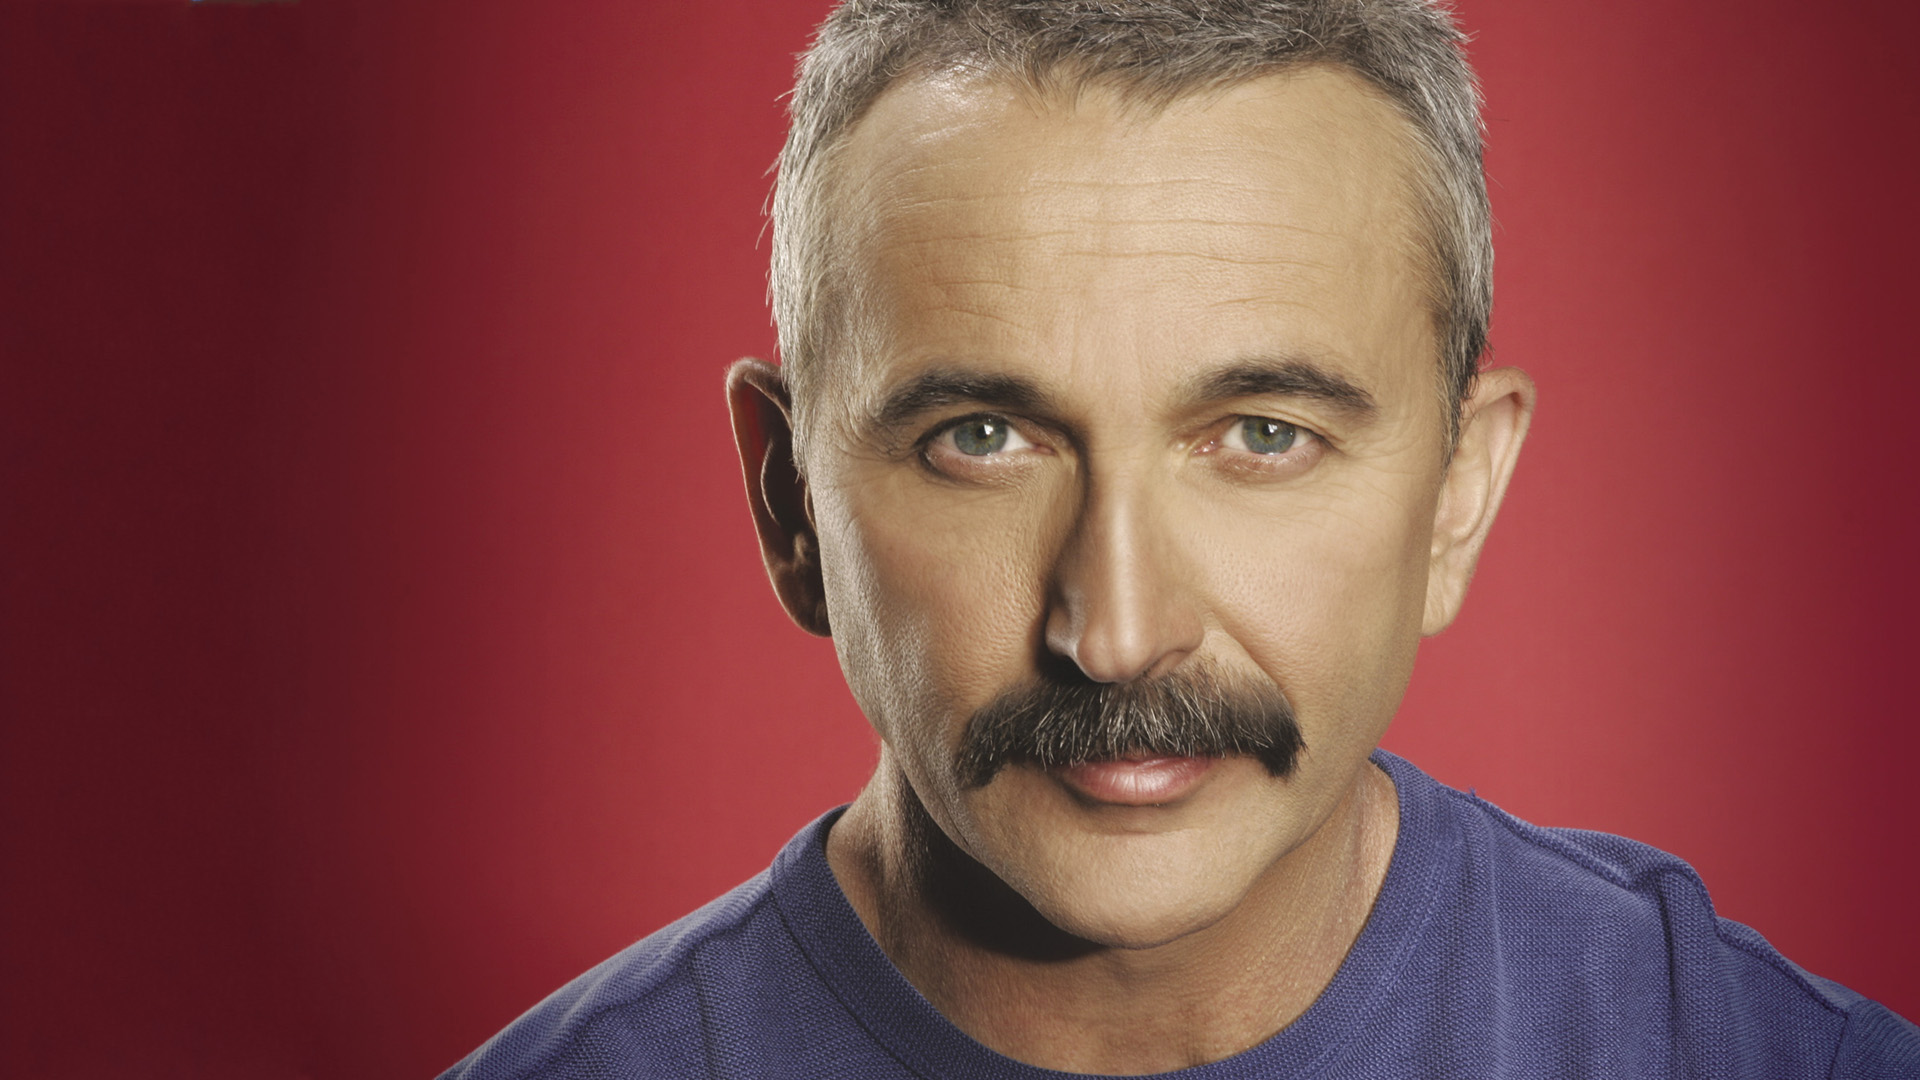 We Can't Get Any Higher av Aaron Tippin